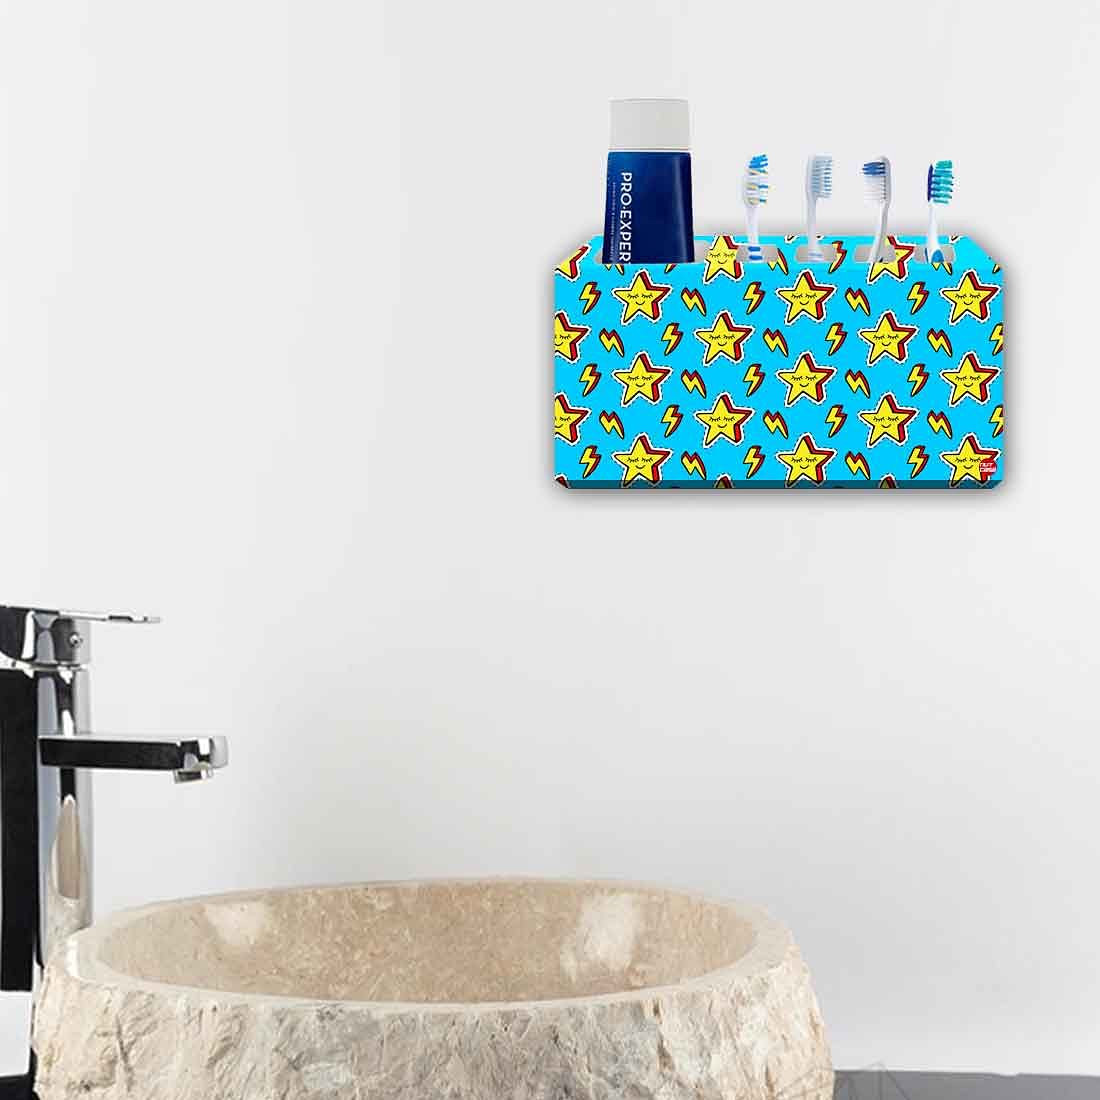 Toothbrush Holder Wall Mounted -Cute Stars Nutcase